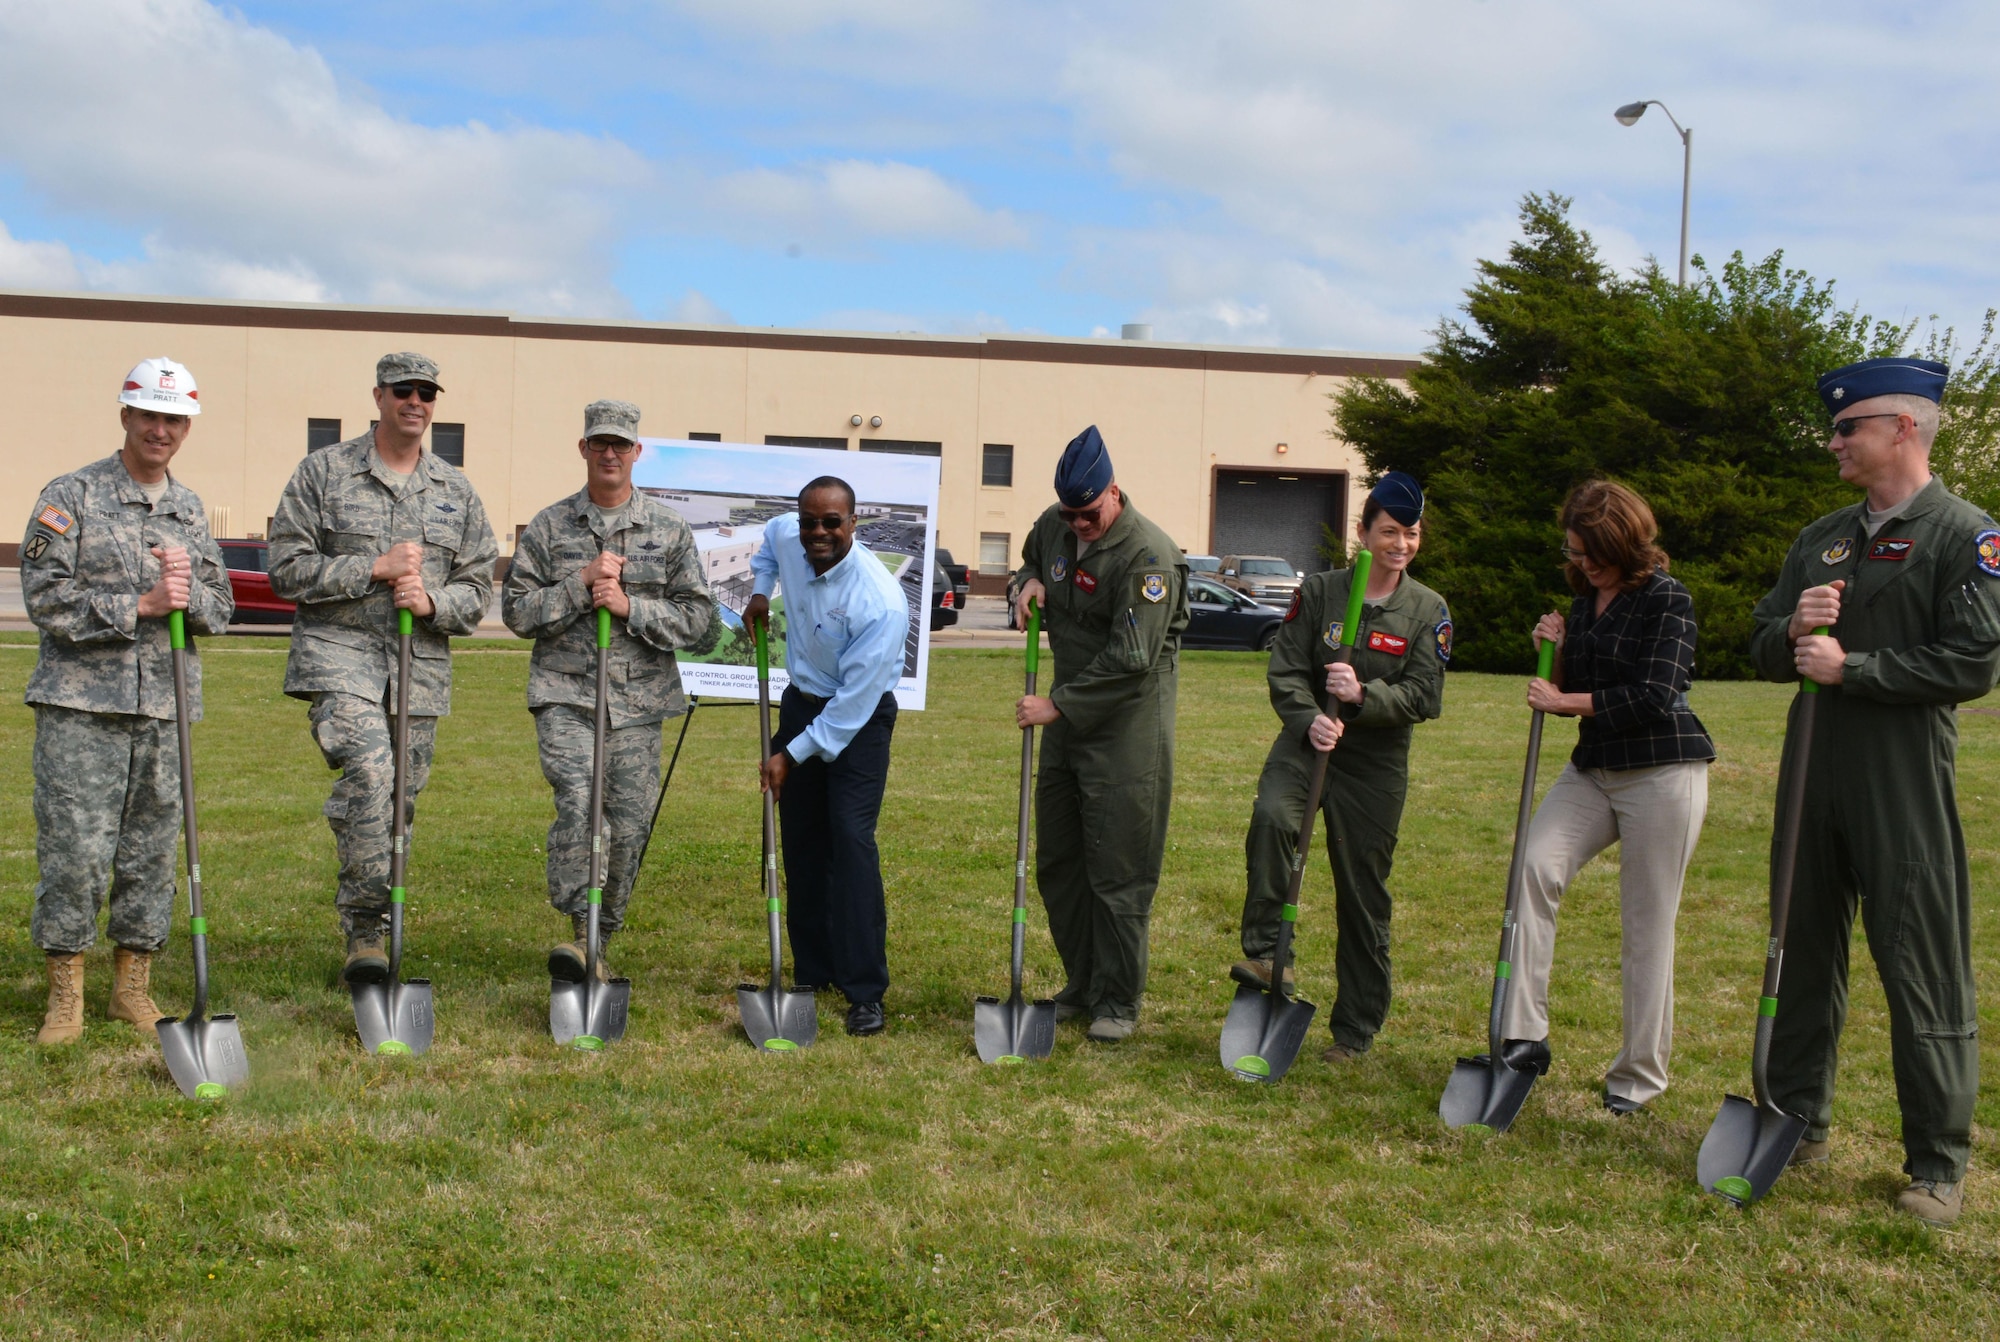 Officials from Tinker Air Force Base, Air Force Reserve, Fortis Networks, Inc. and the U.S. Army Corps of Engineers break ground for the future 513th Air Control Group operations building here during a ceremony April 14, 2016.
Pictured left to right is Col. Richard Pratt, Army Corps of Engineers, Tulsa District commander, Col. Bradley Bird, 552nd Air Control Wing vice commander, Chief Master Sgt. Jeffrey Davis, 513th Air Control Group command chief, Clarence McAllister, Fortis Networks, Inc., Col. David  Robertson, 513th Air Control Group commander, Lt. Col. Jennifer Cress, 513th Operations Support Squadron commander, Cathy Scheirman, 72nd Air Base Wing Civil Engineer Directorate chief and Lt. Col. Jim Mattey, 970th Airborne Air Control Squadron director of operations.
(U.S. Air Force Photo/Maj. Jon Quinlan)
